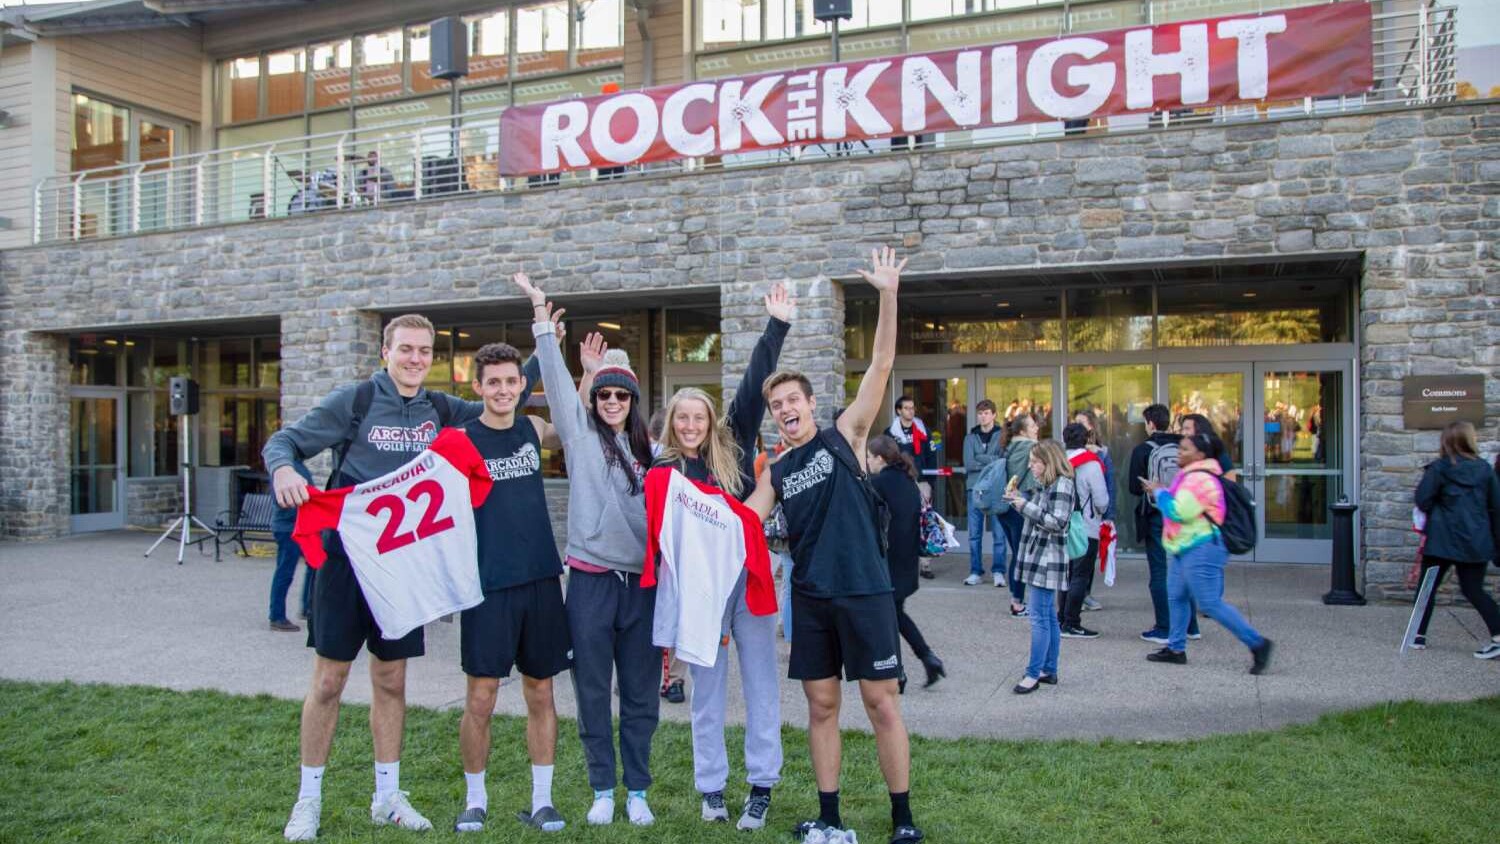 Students celebrate at Rock The Knight